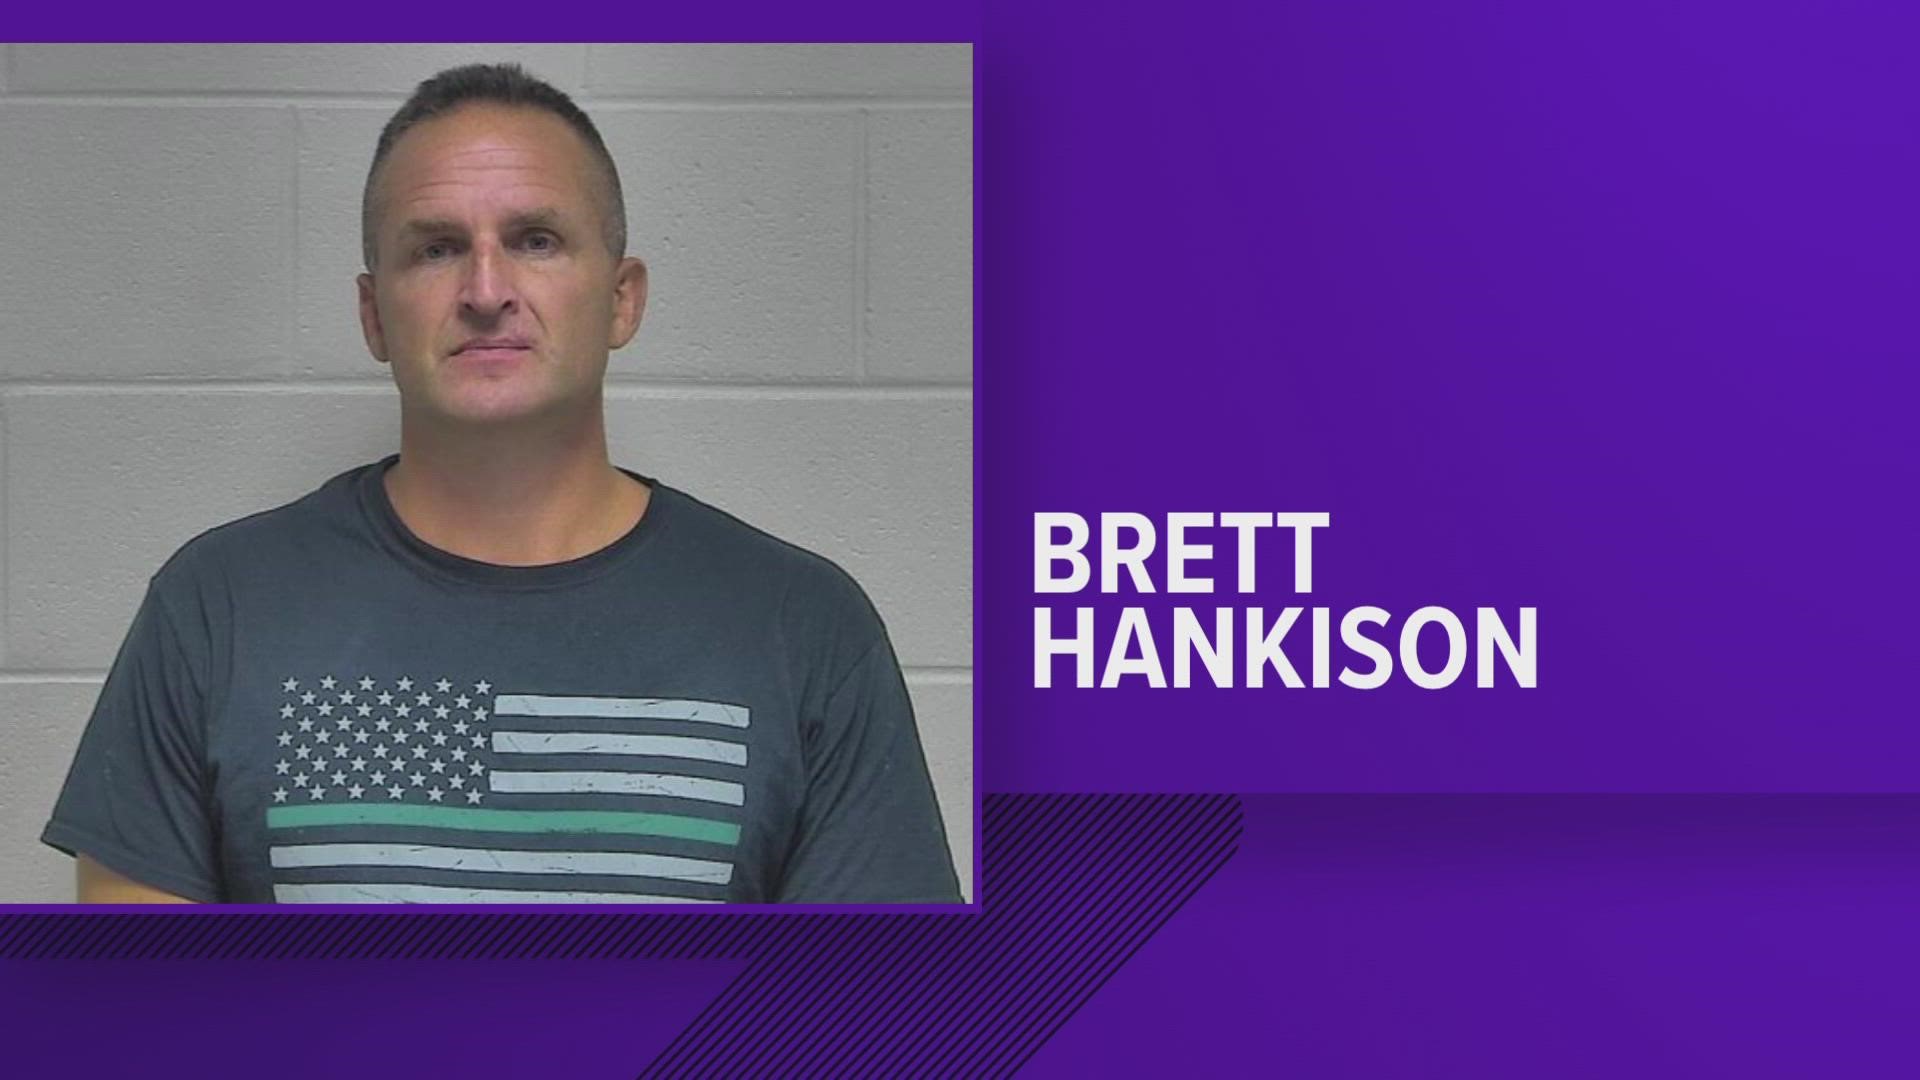 Brett Hankison was indicted last month on federal charges in connection to the 2020 raid that ended in Breonna Taylor's death.